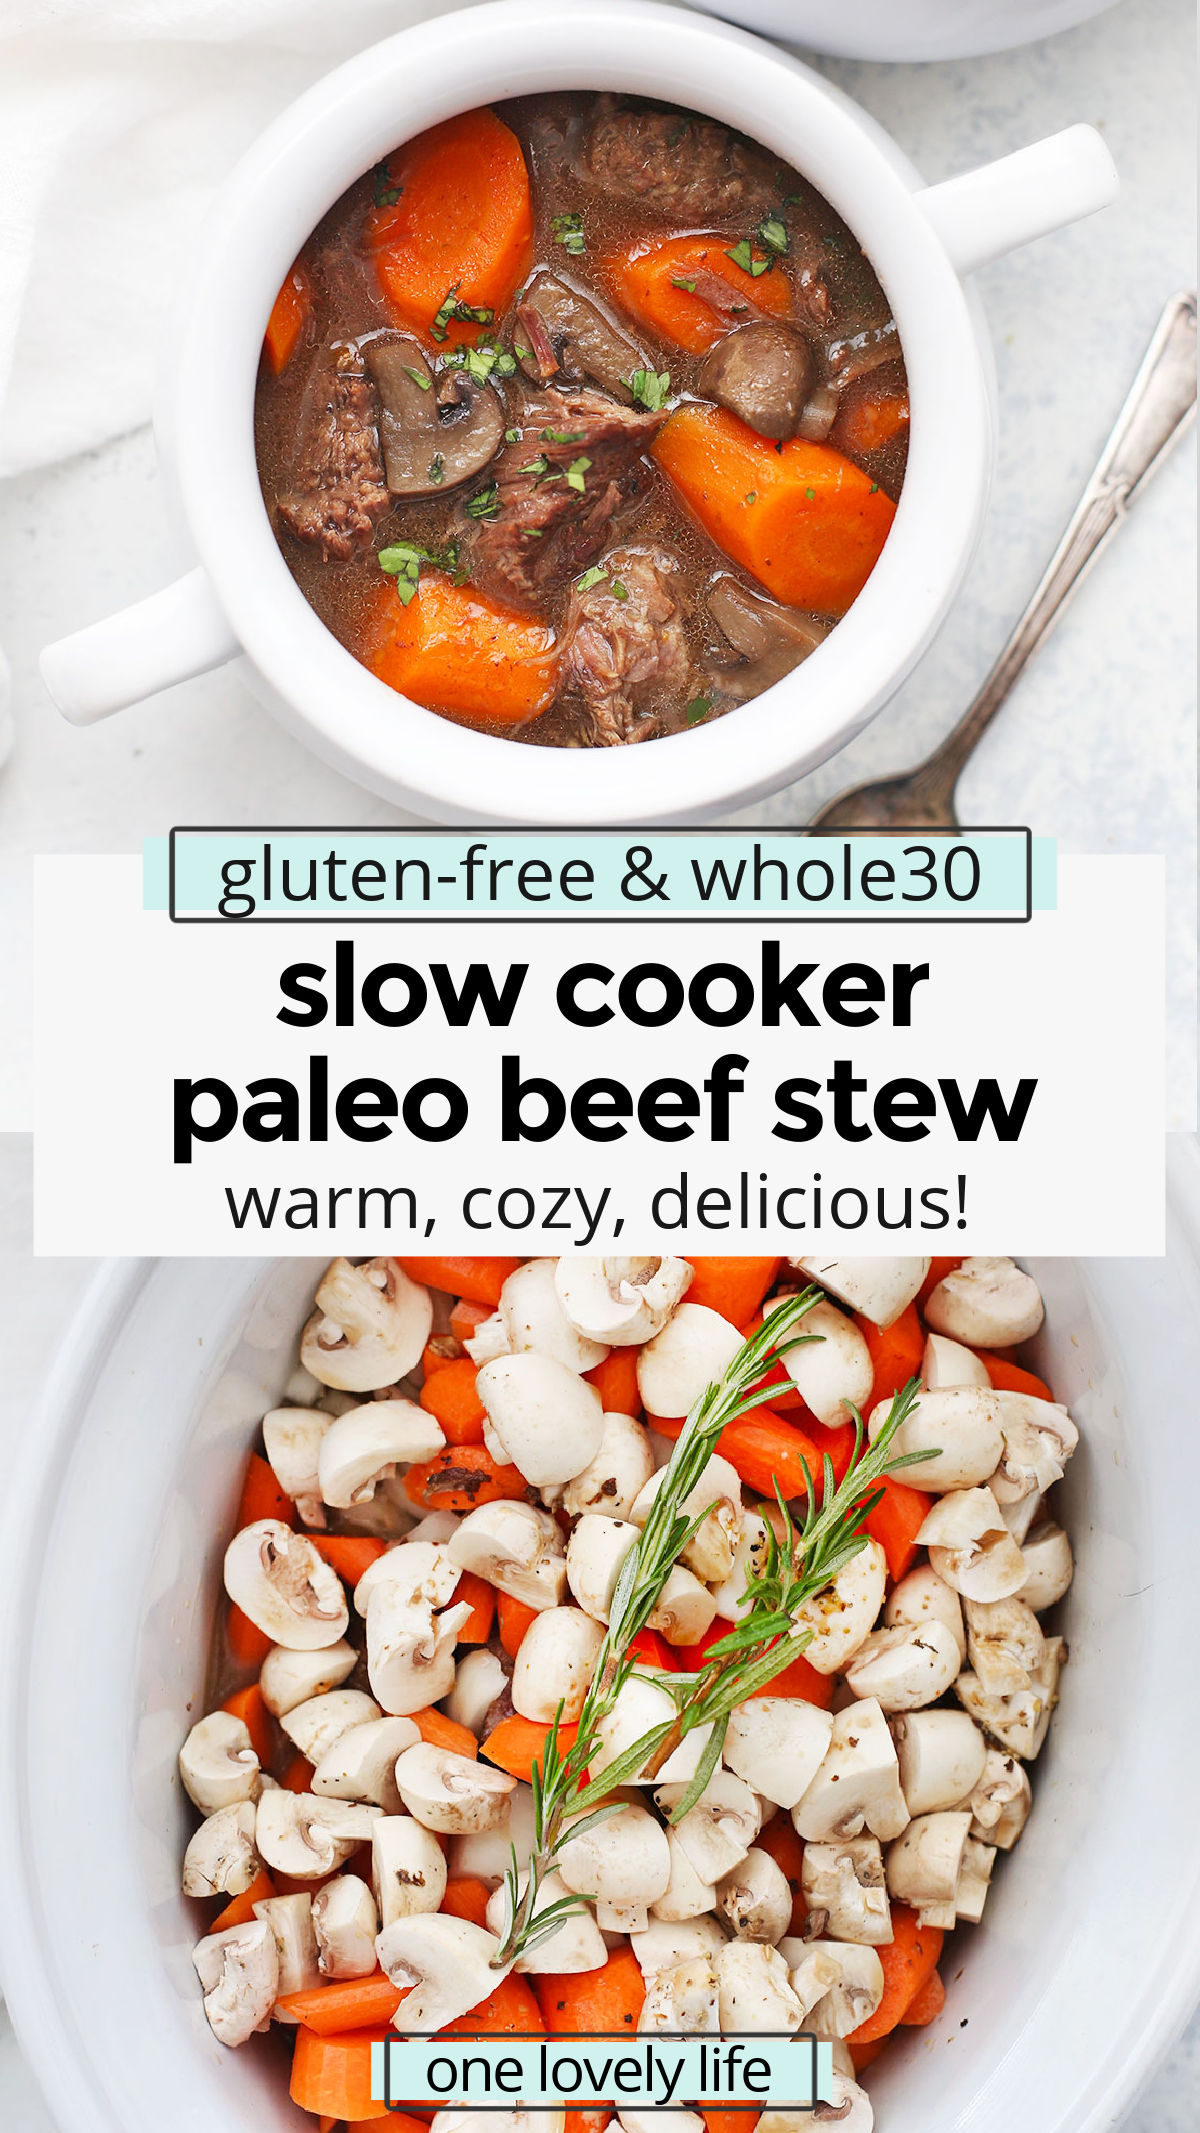 Slow Cooker Beef Stew - This paleo beef stew couldn't be easier! Let the slow cooker do the work and enjoy a cozy Whole30 dinner! (Paleo & Whole30 Friendly) // crock pot beef stew // whole30 beef stew // paleo beef stew recipe // healthy beef stew // crockpot beef stew // crockpot paleo beef stew // paleo stew recipe